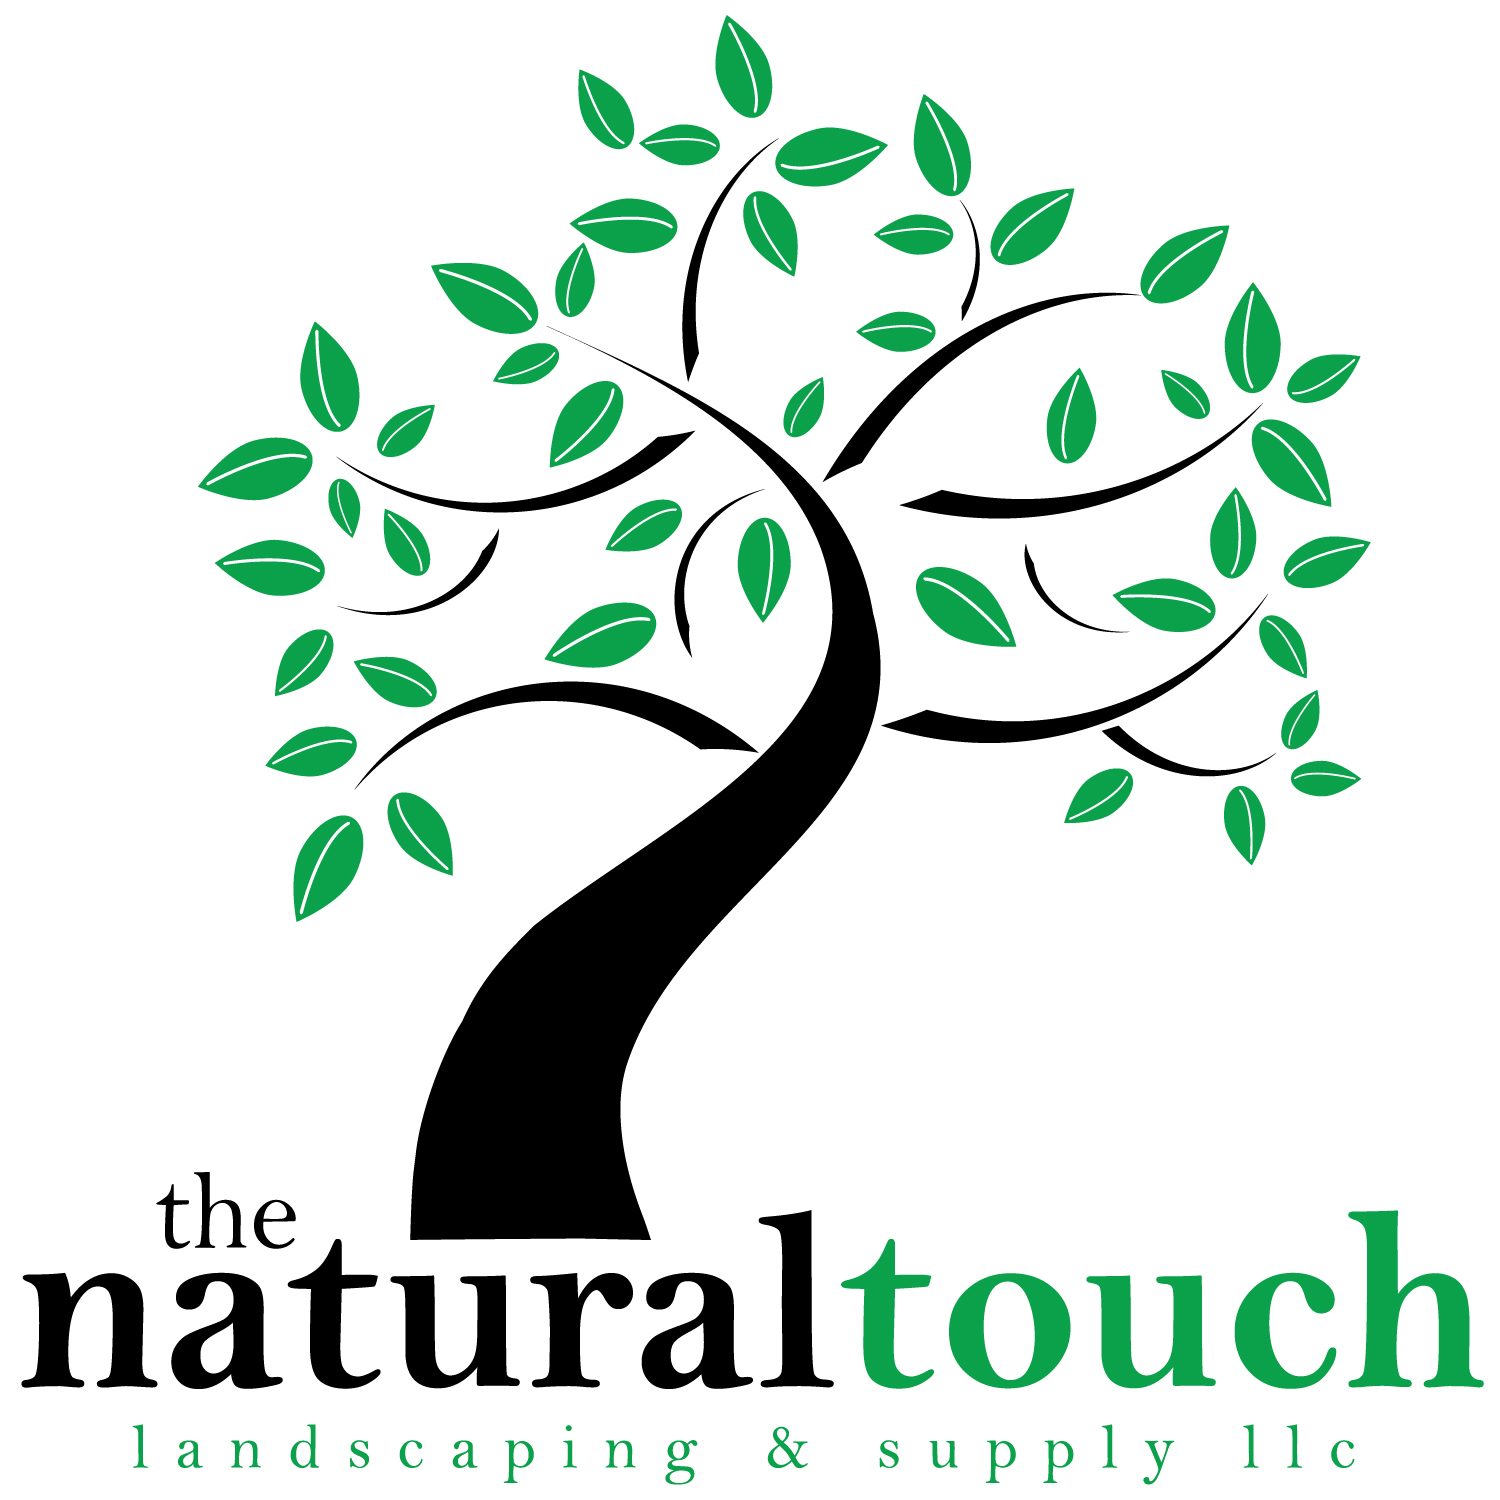 The Natural Touch Landscaping and Supply